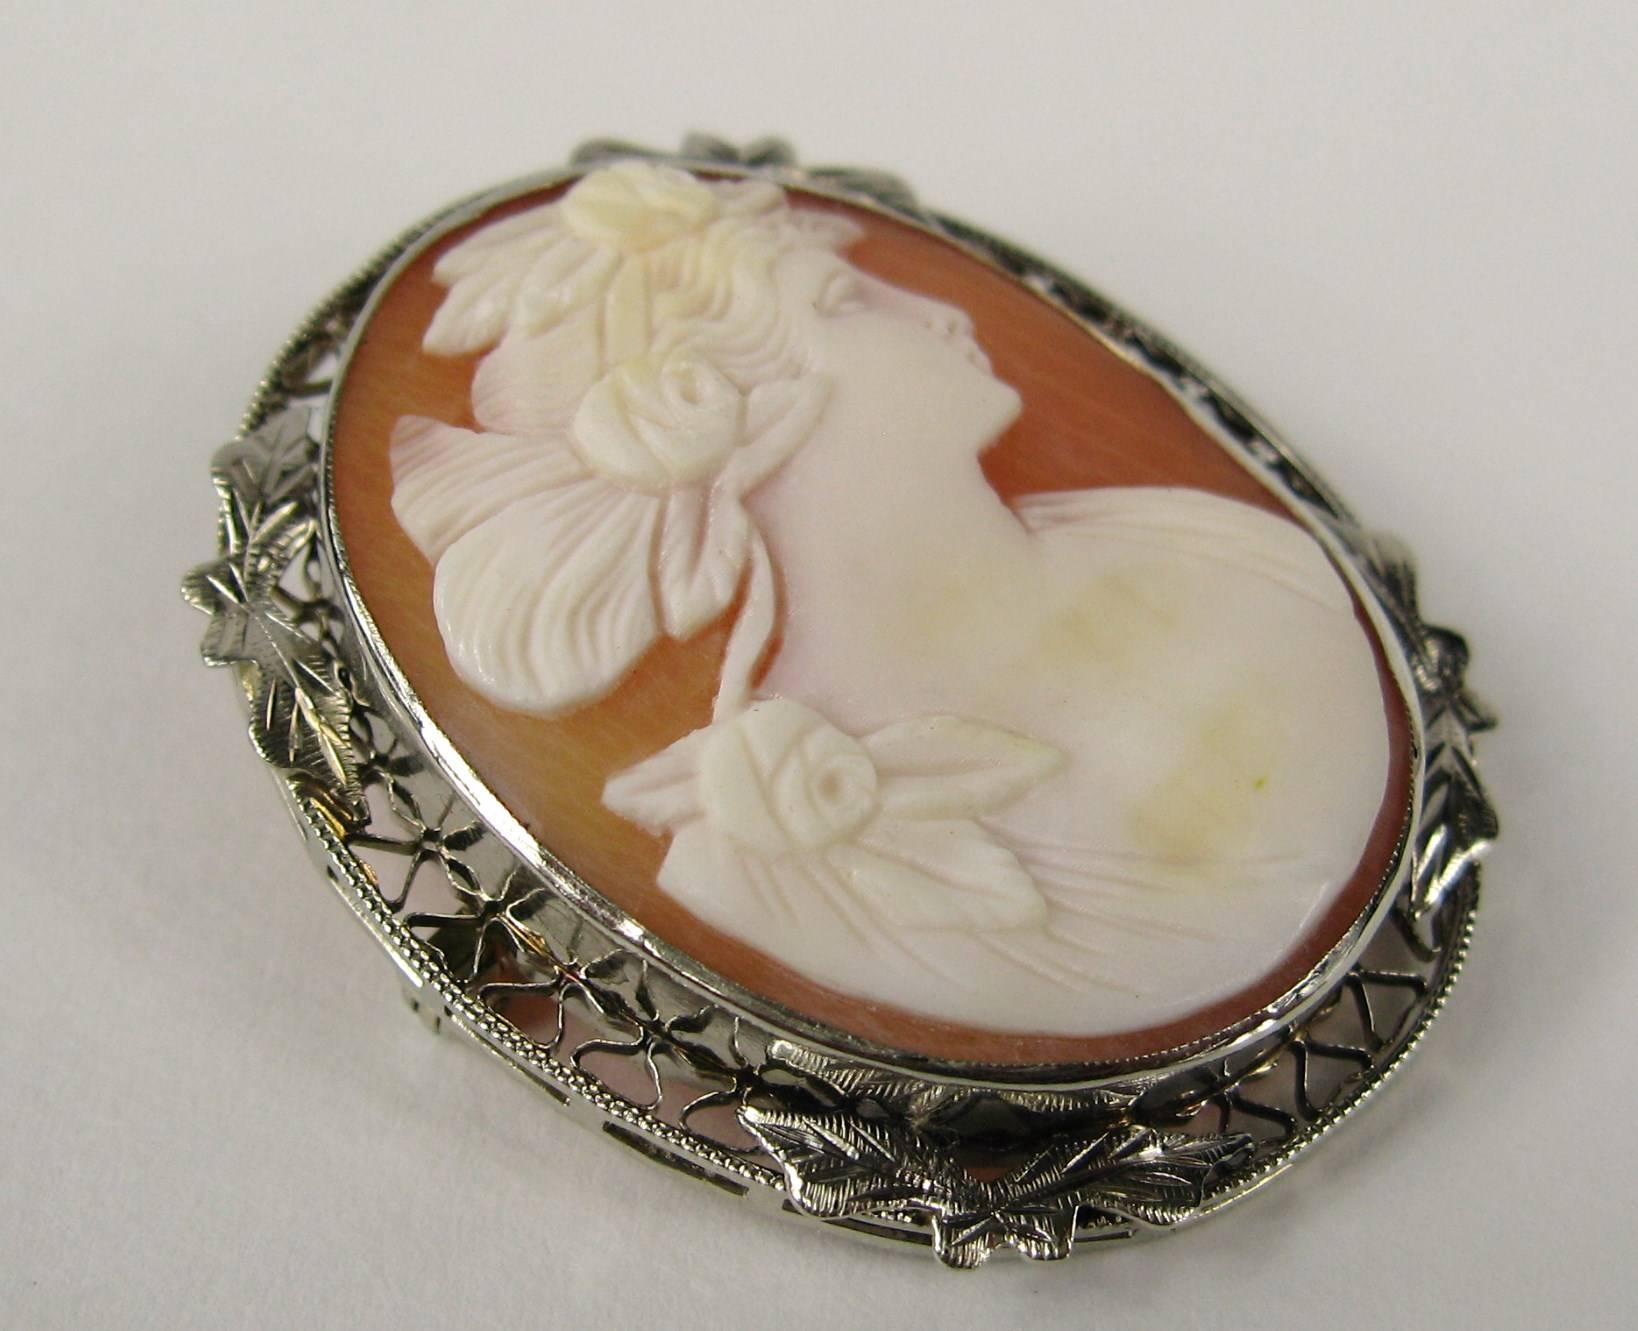 Portrait Cameo set in 14K gold. It's Both a brooch and pendant. Measuring 1.37 in top to bottom x 1.11 in wide. Fold down pendant hoop and pin back all in working order. This is out of a massive collection of Contemporary designer & Vintage clothing